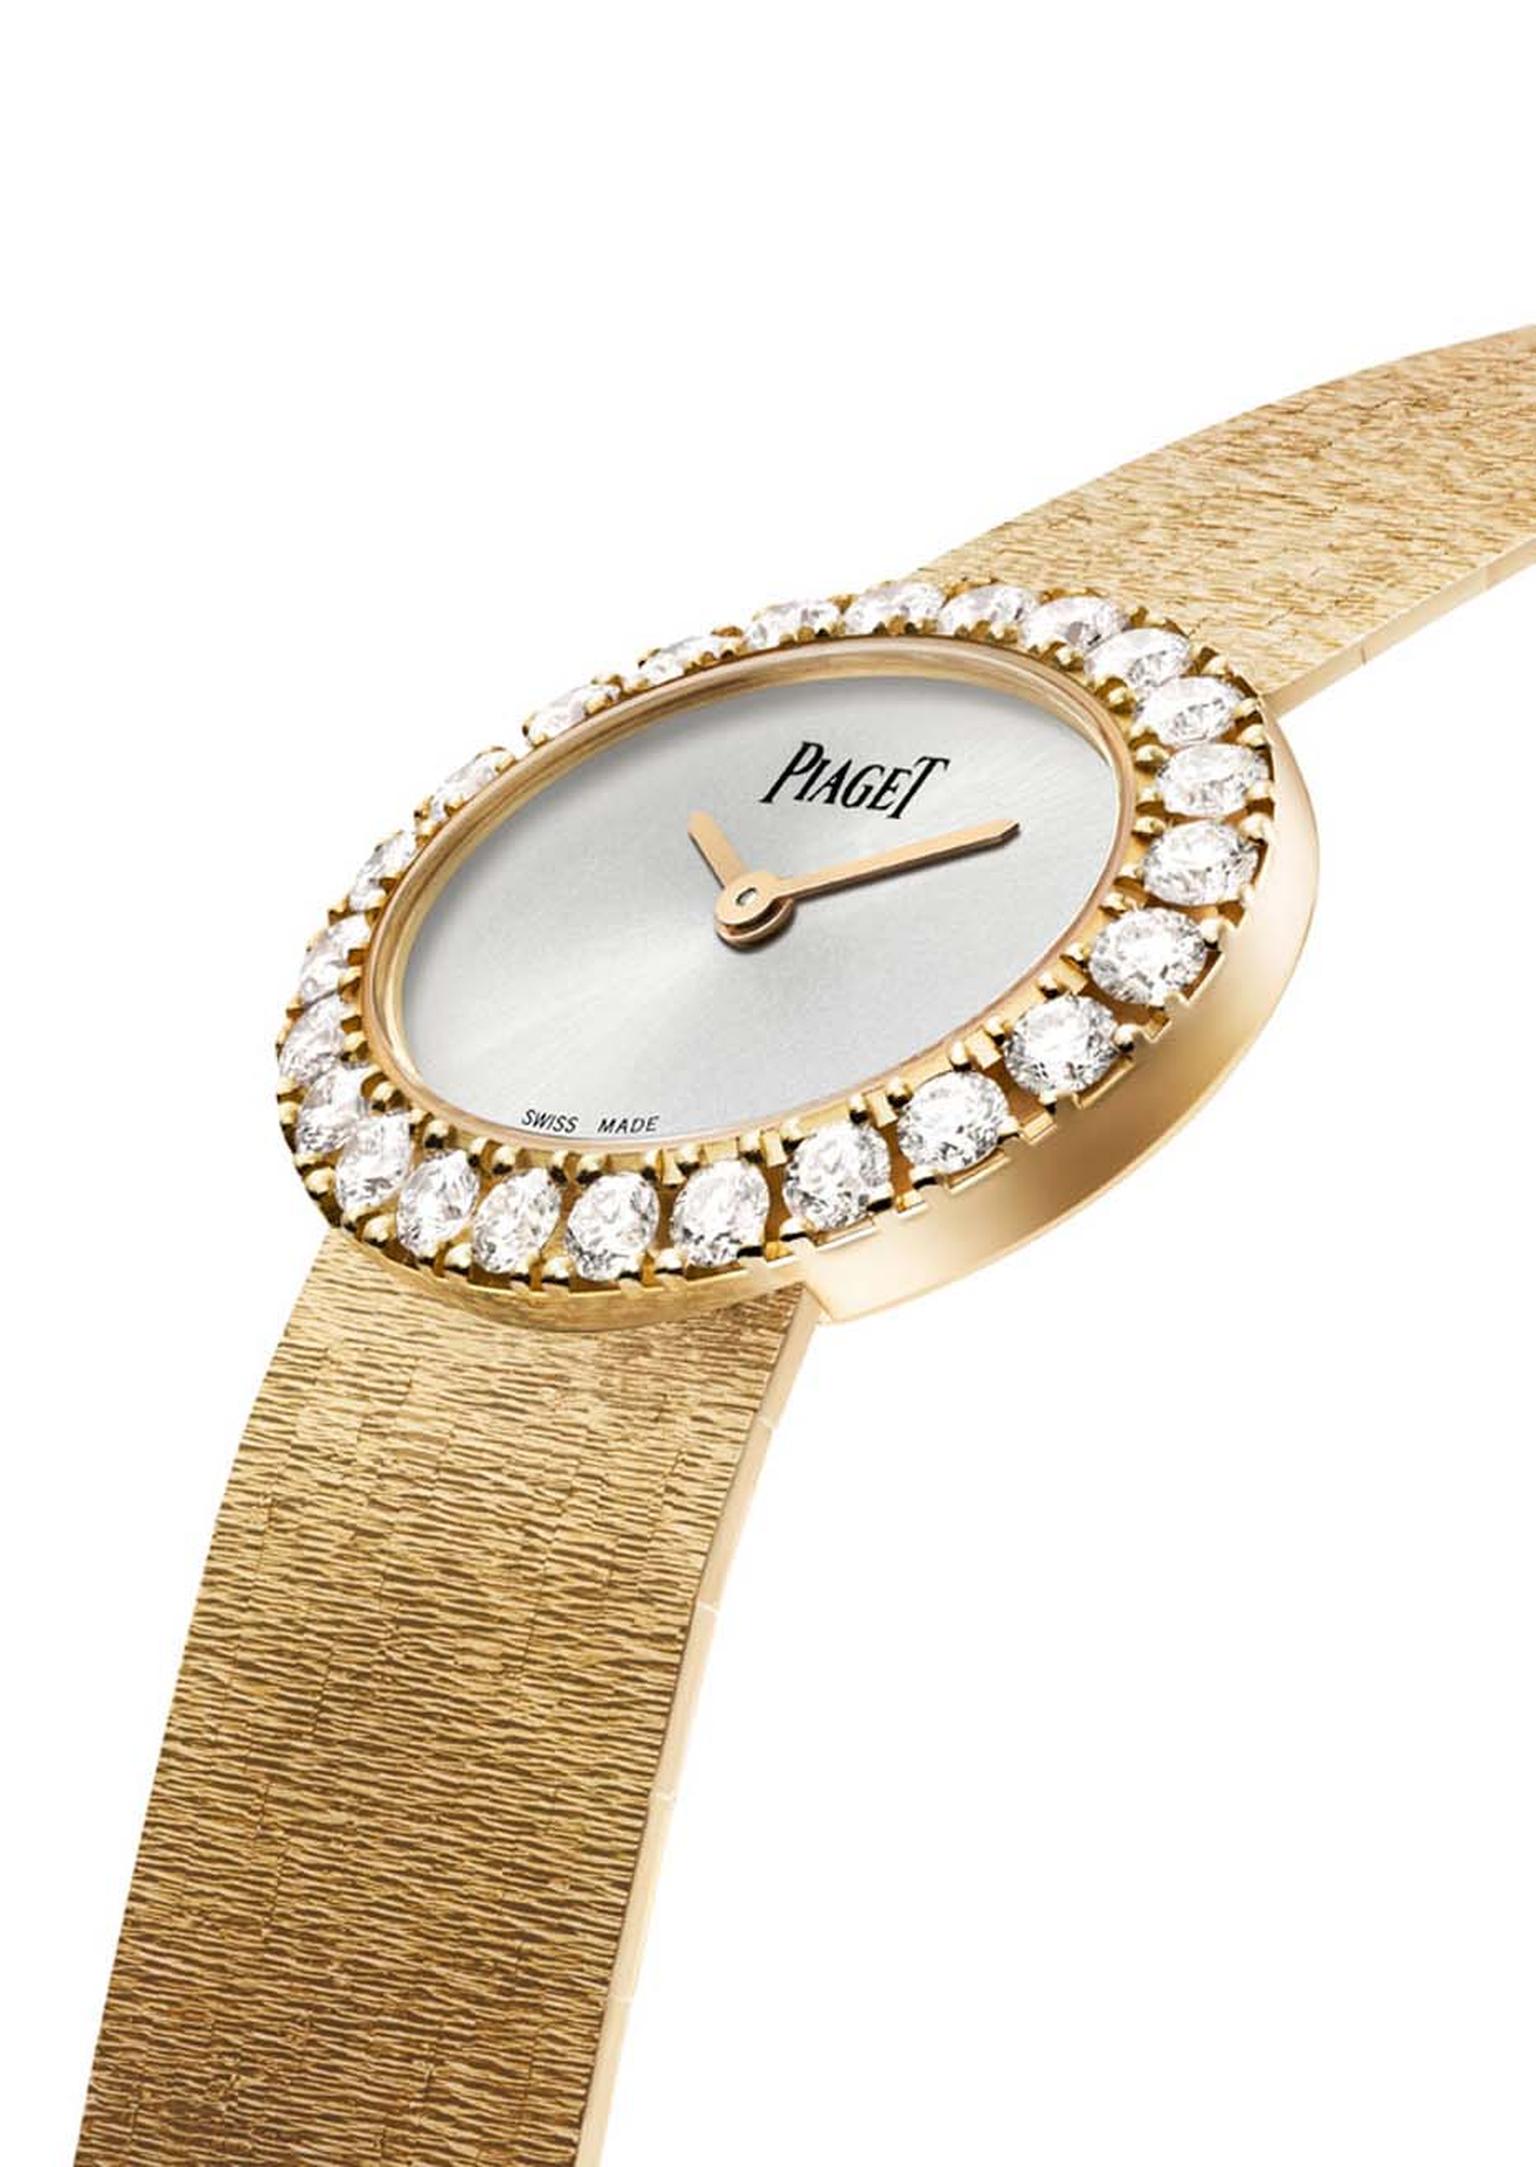 The slim case of the Piaget Gold Oval watch features a diamond bezel surrounding an uncluttered soft silver tone dial.